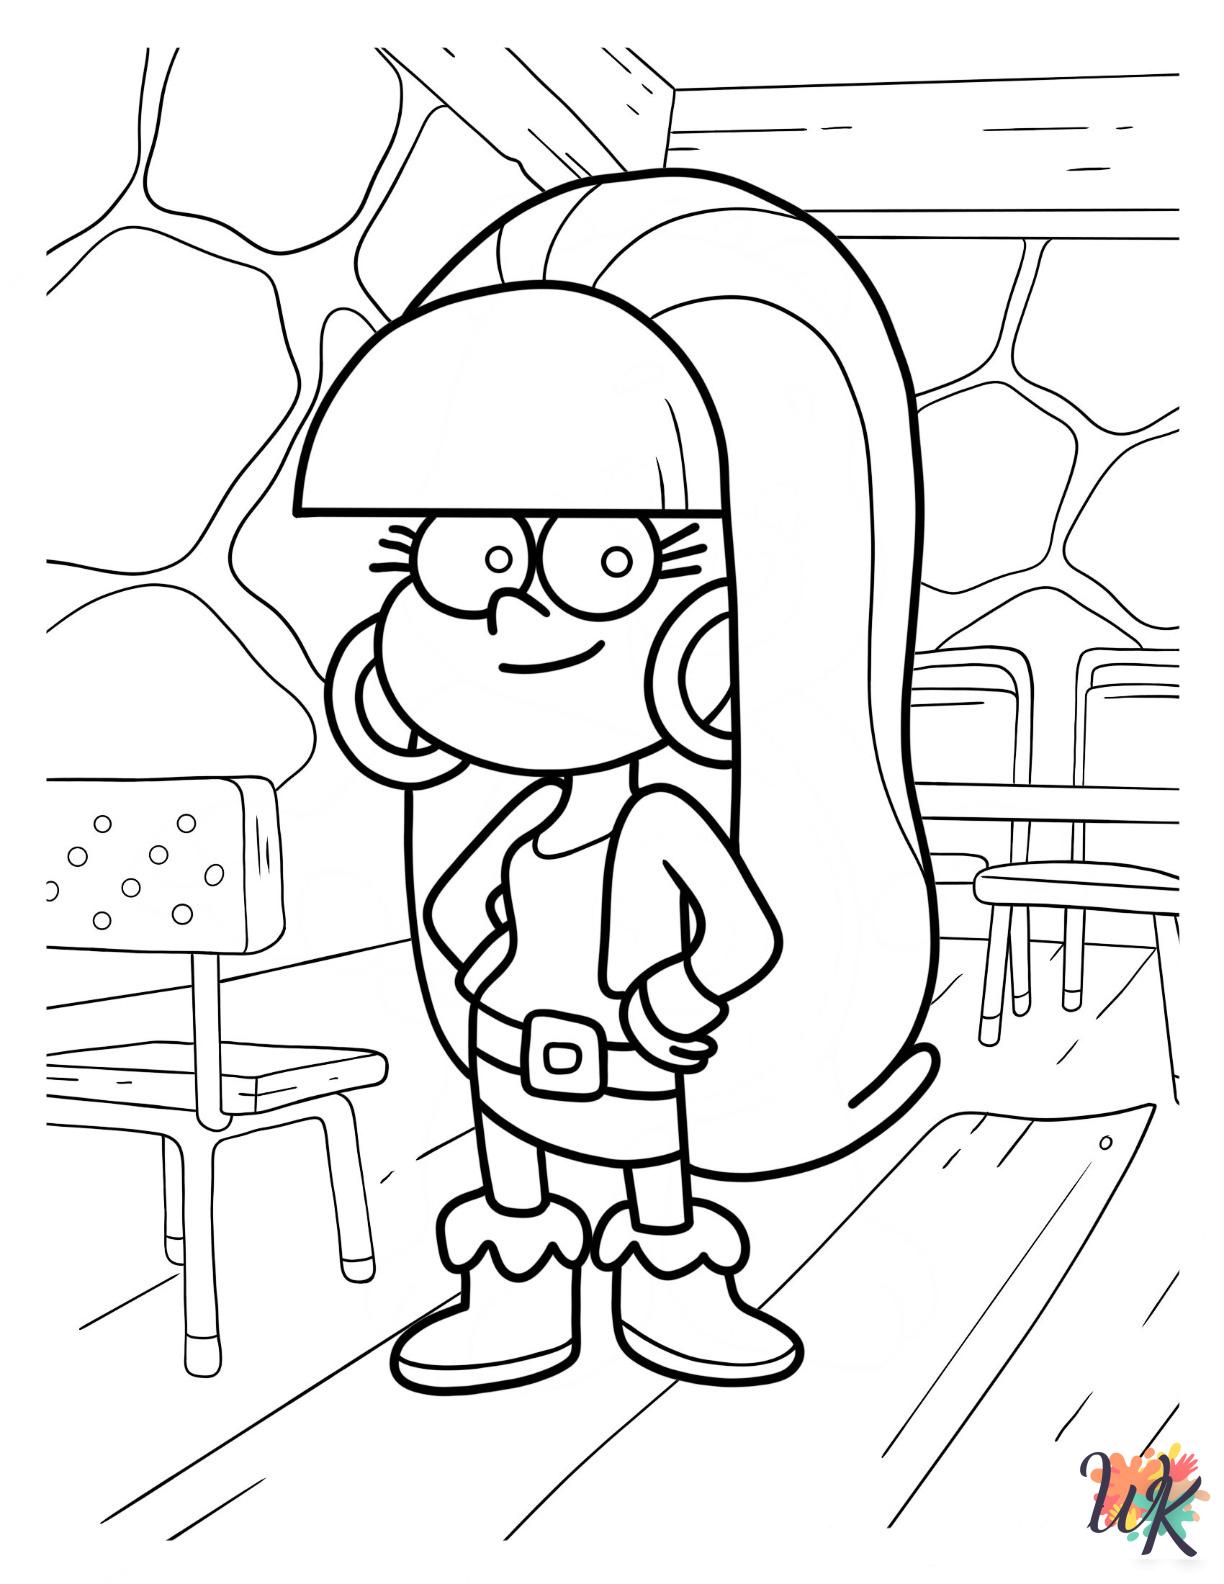 Gravity Falls ornaments coloring pages